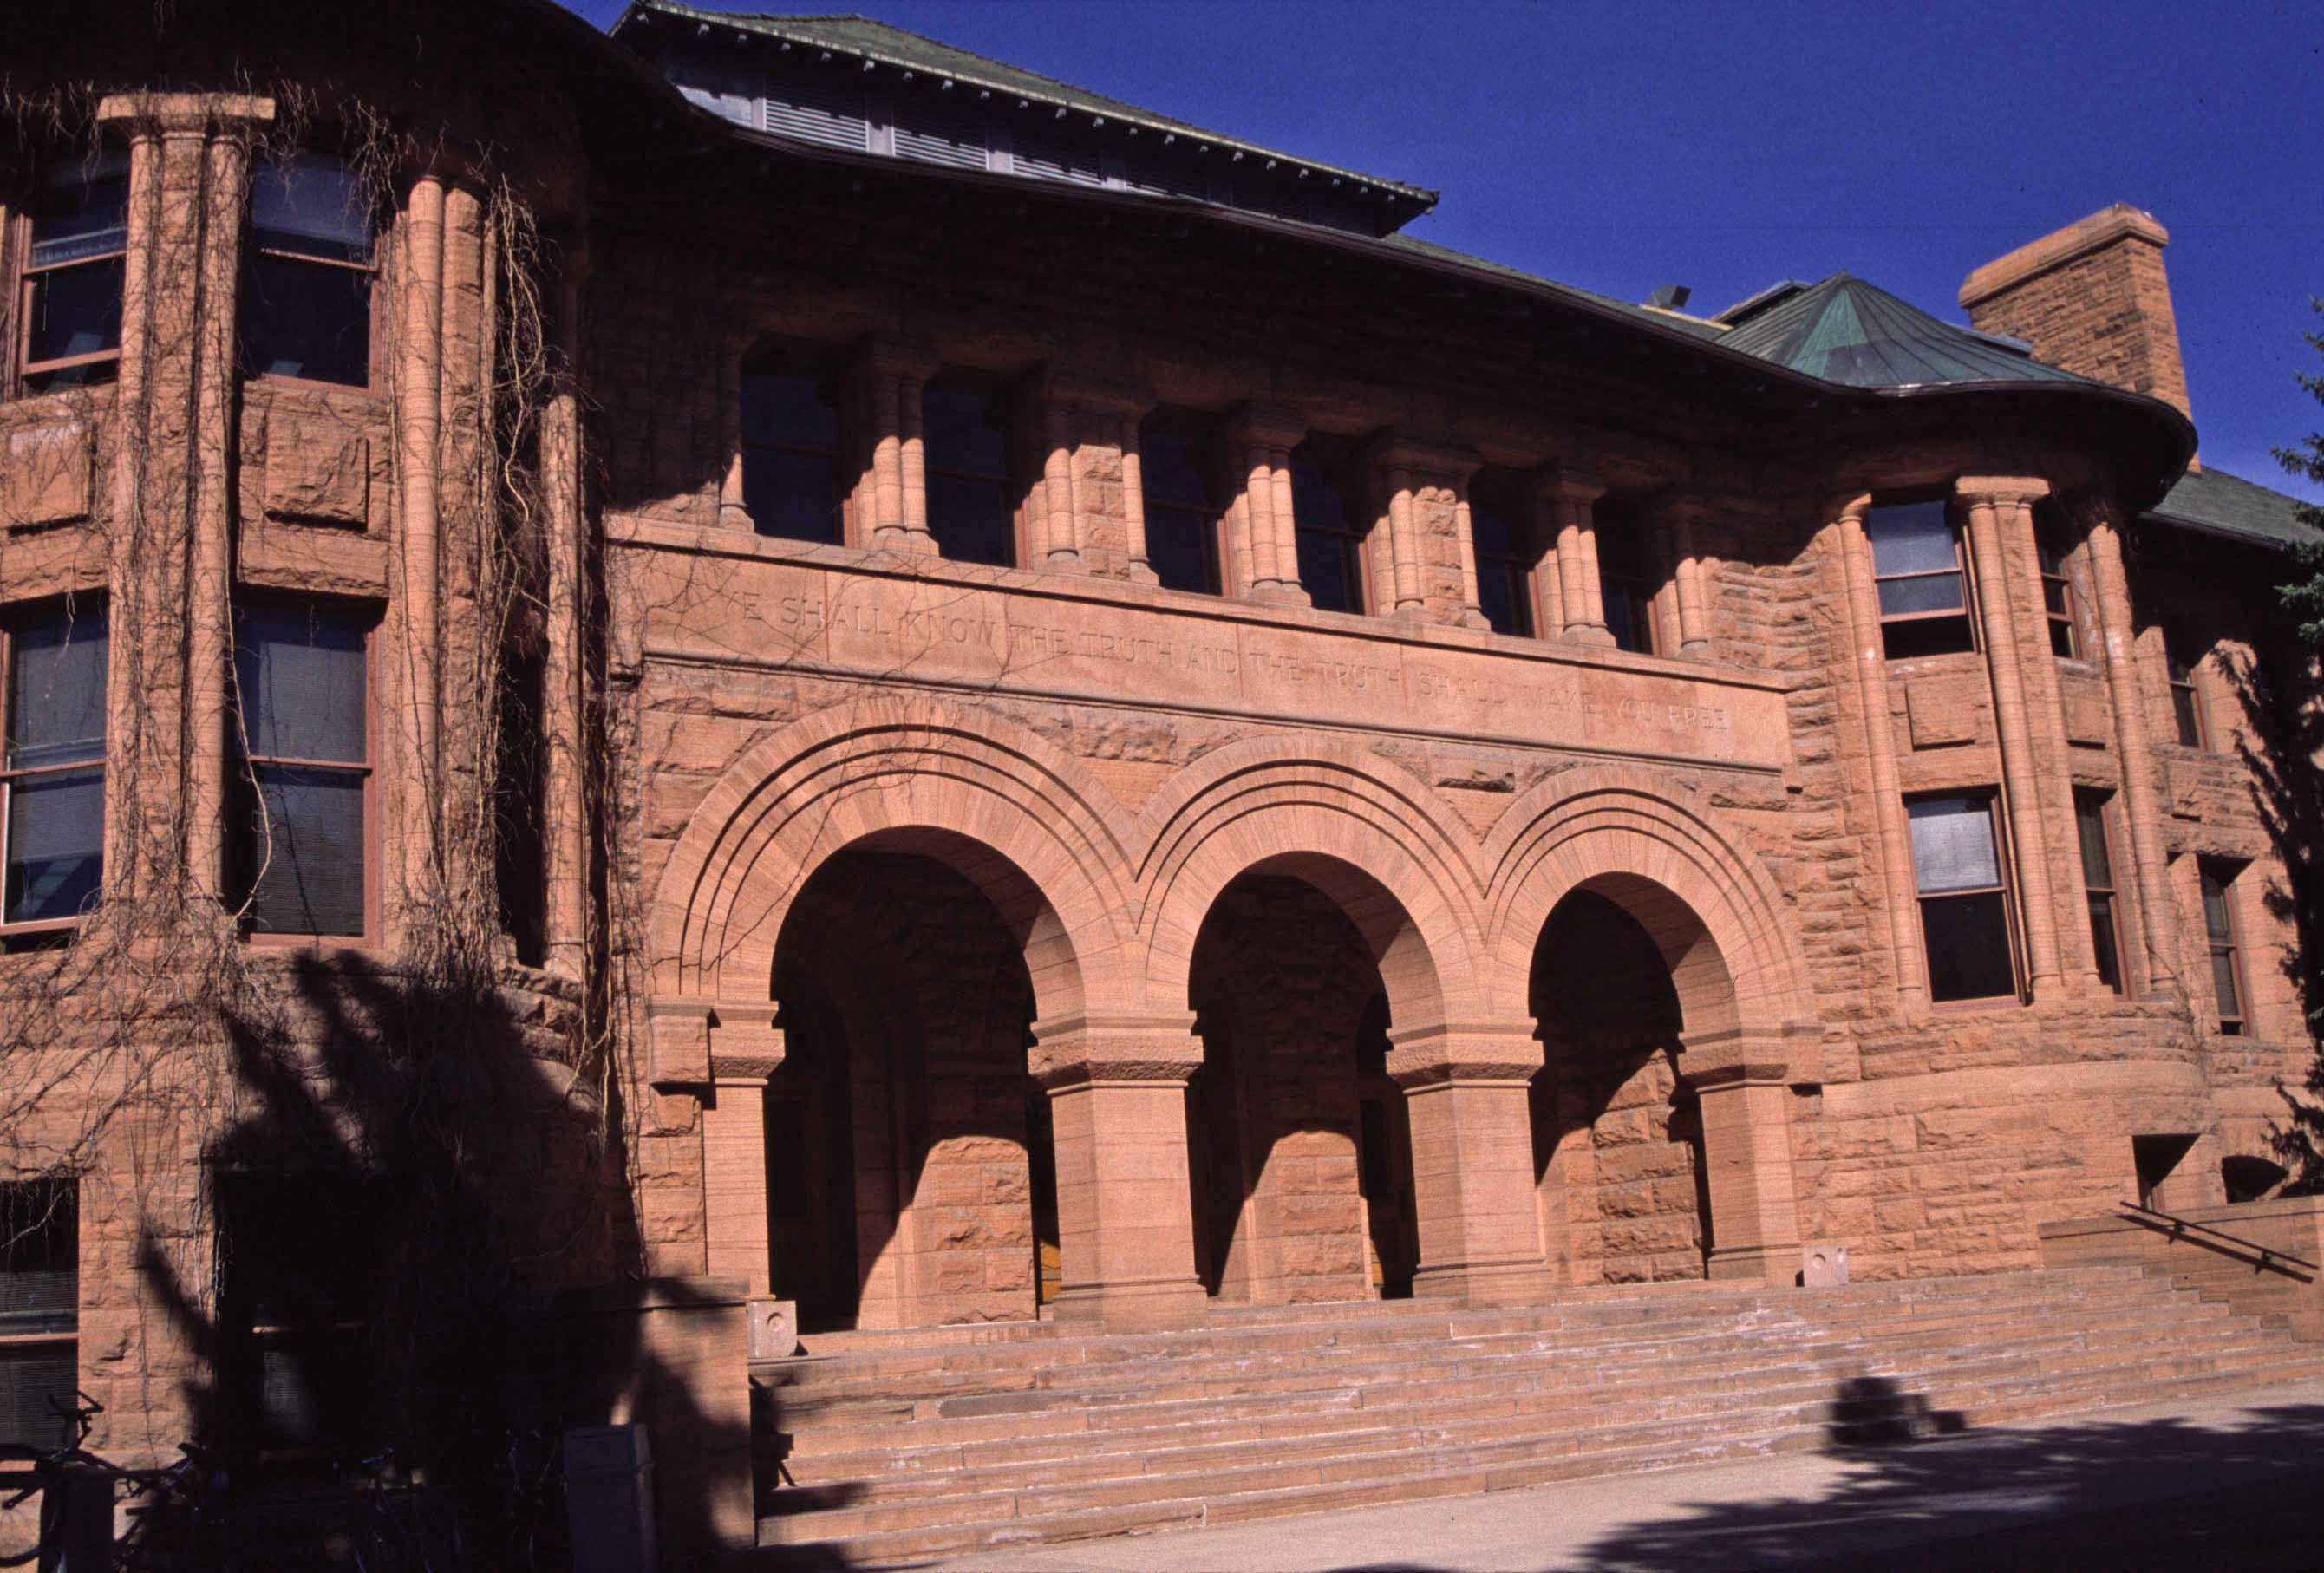 Palmer Hall, a red sandstone Romanesque Revival style building at Colorado College.